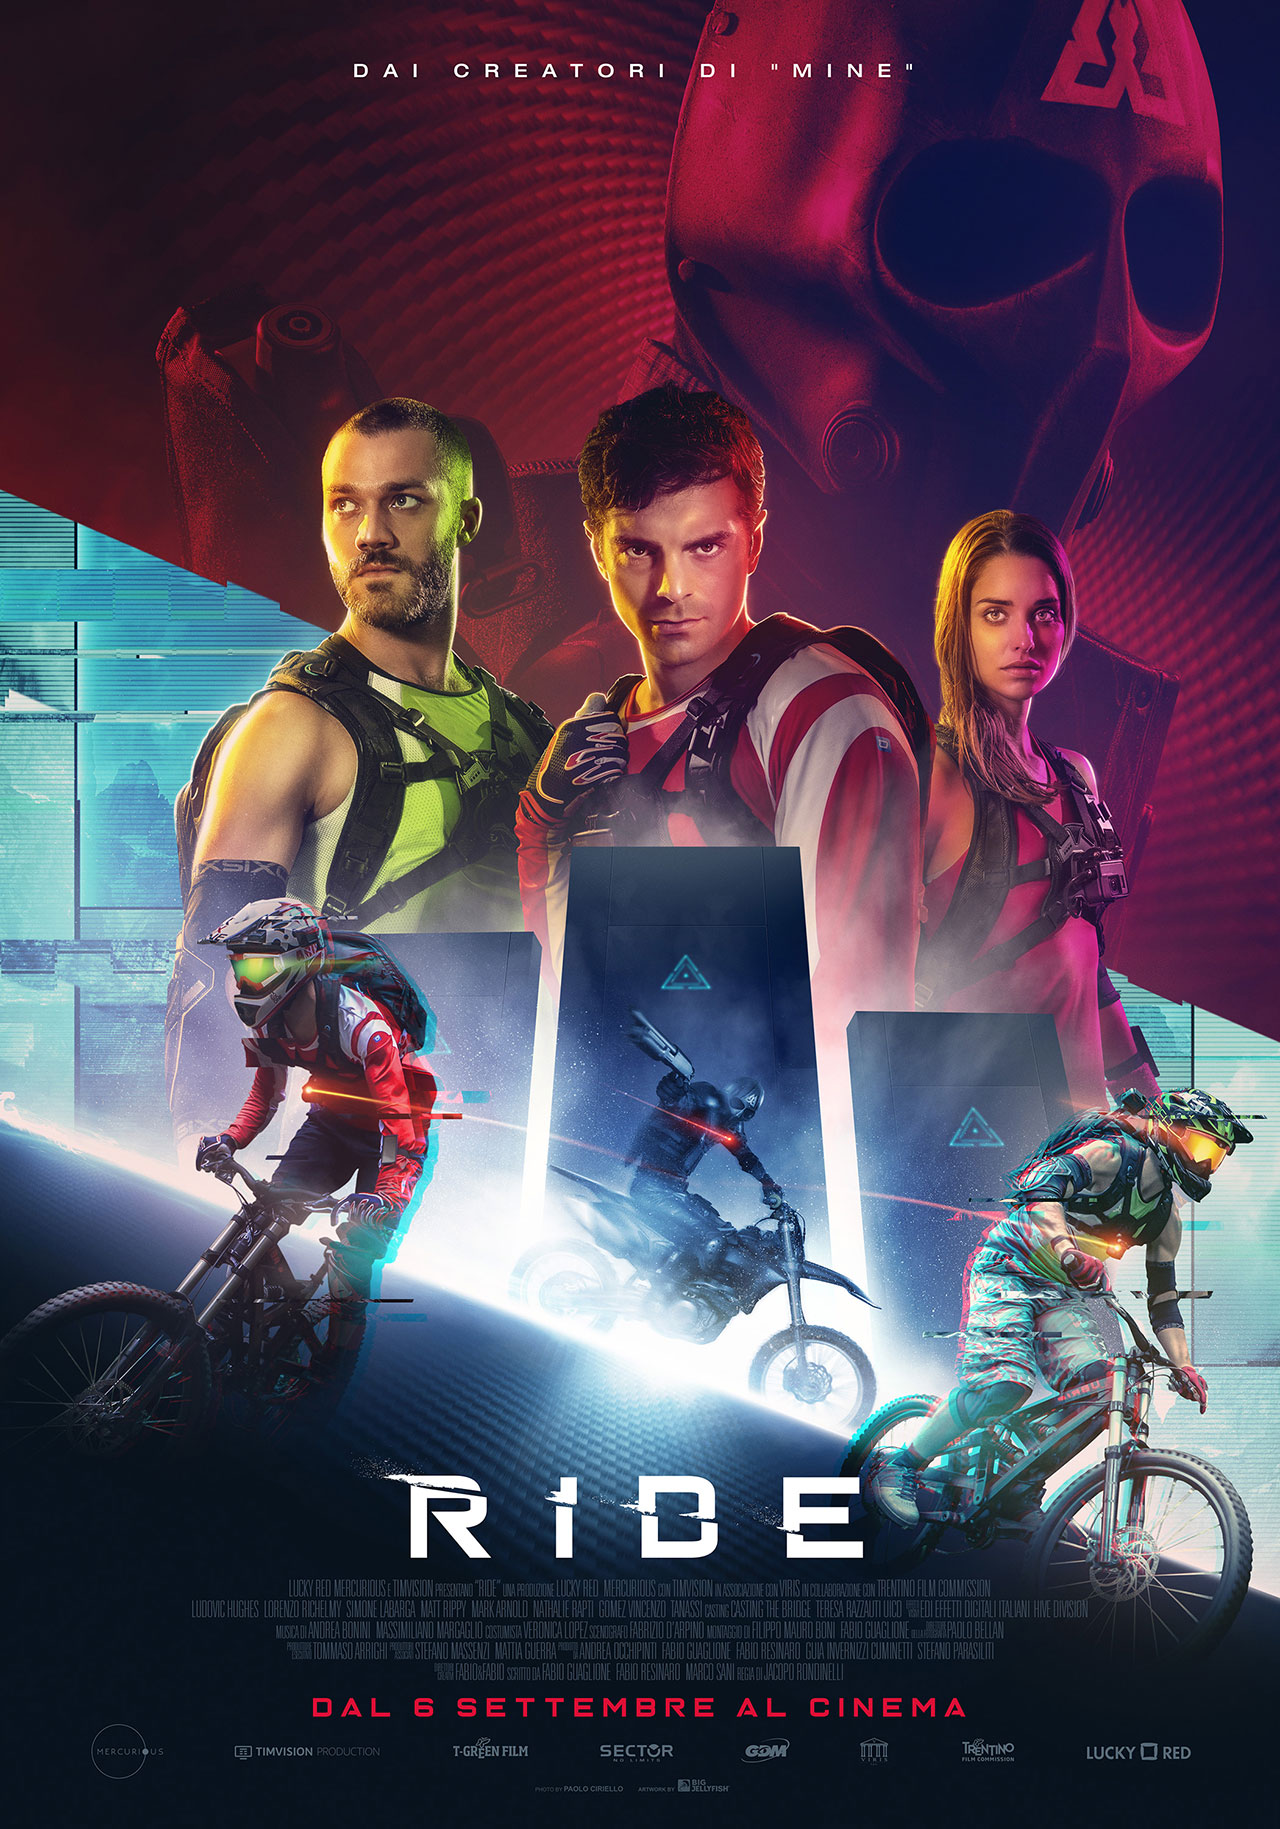 Ride, il poster ufficiale - MYmovies.it